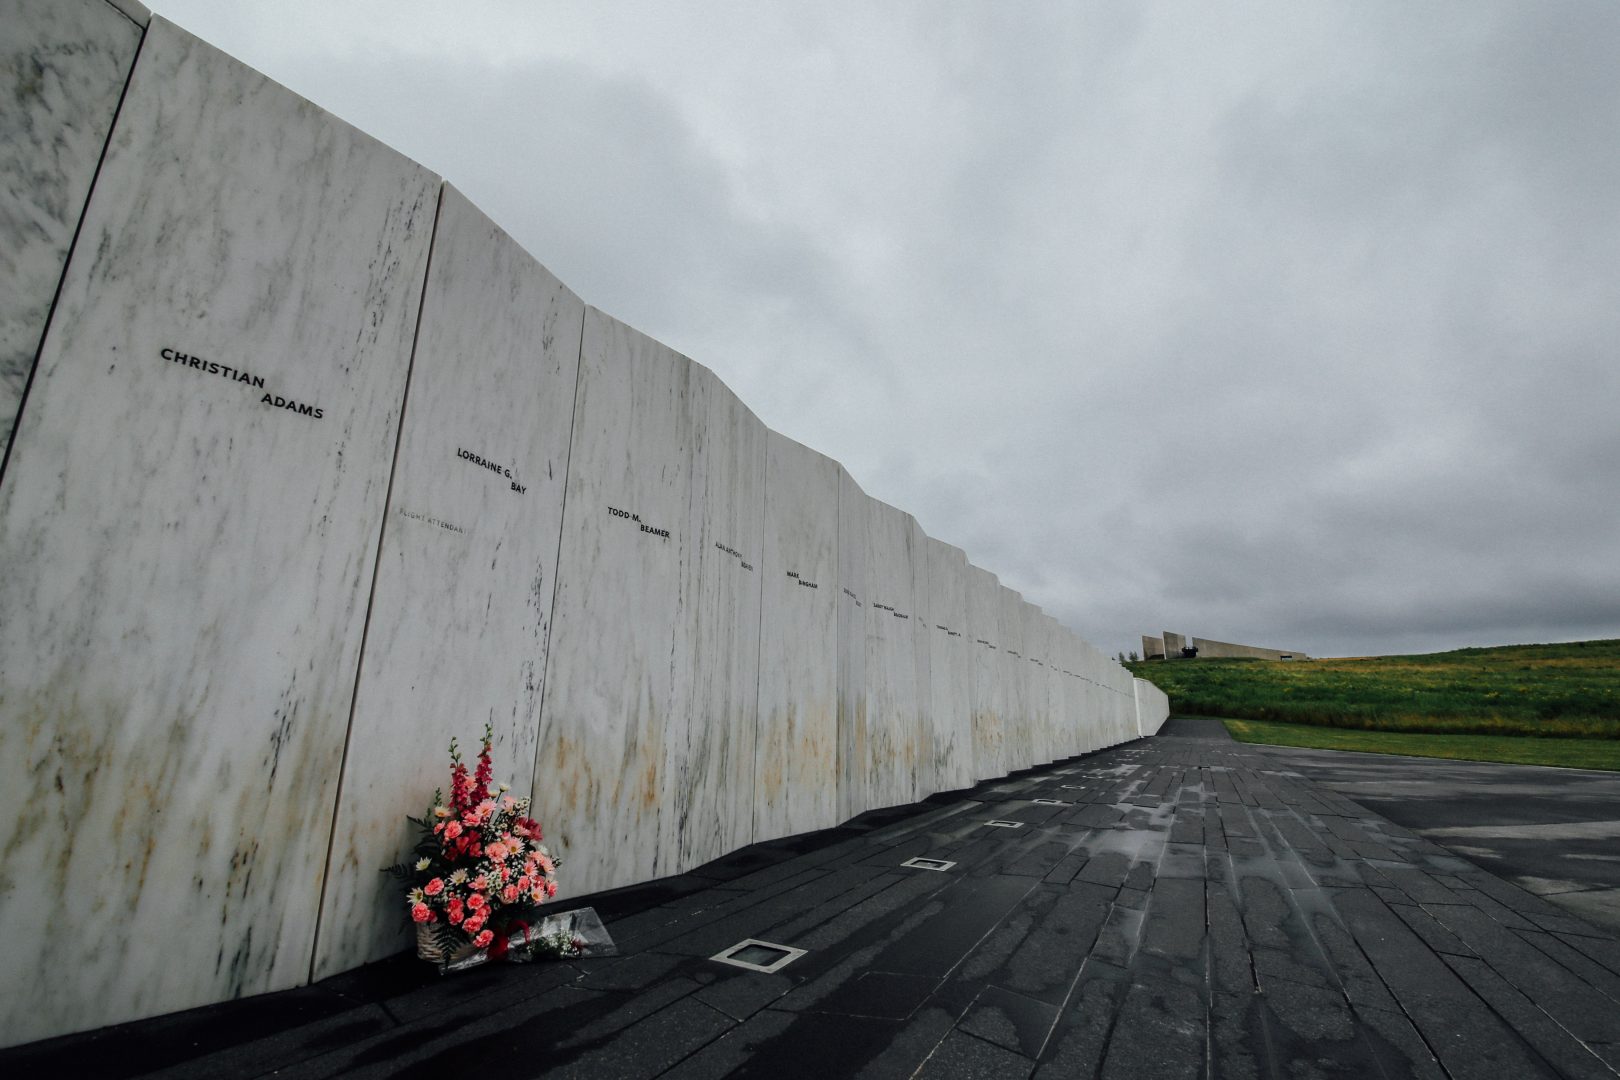 The Wall of Names was the first portion of the memorial to open to the public, in 2011. (Tim Lambert/WITF)